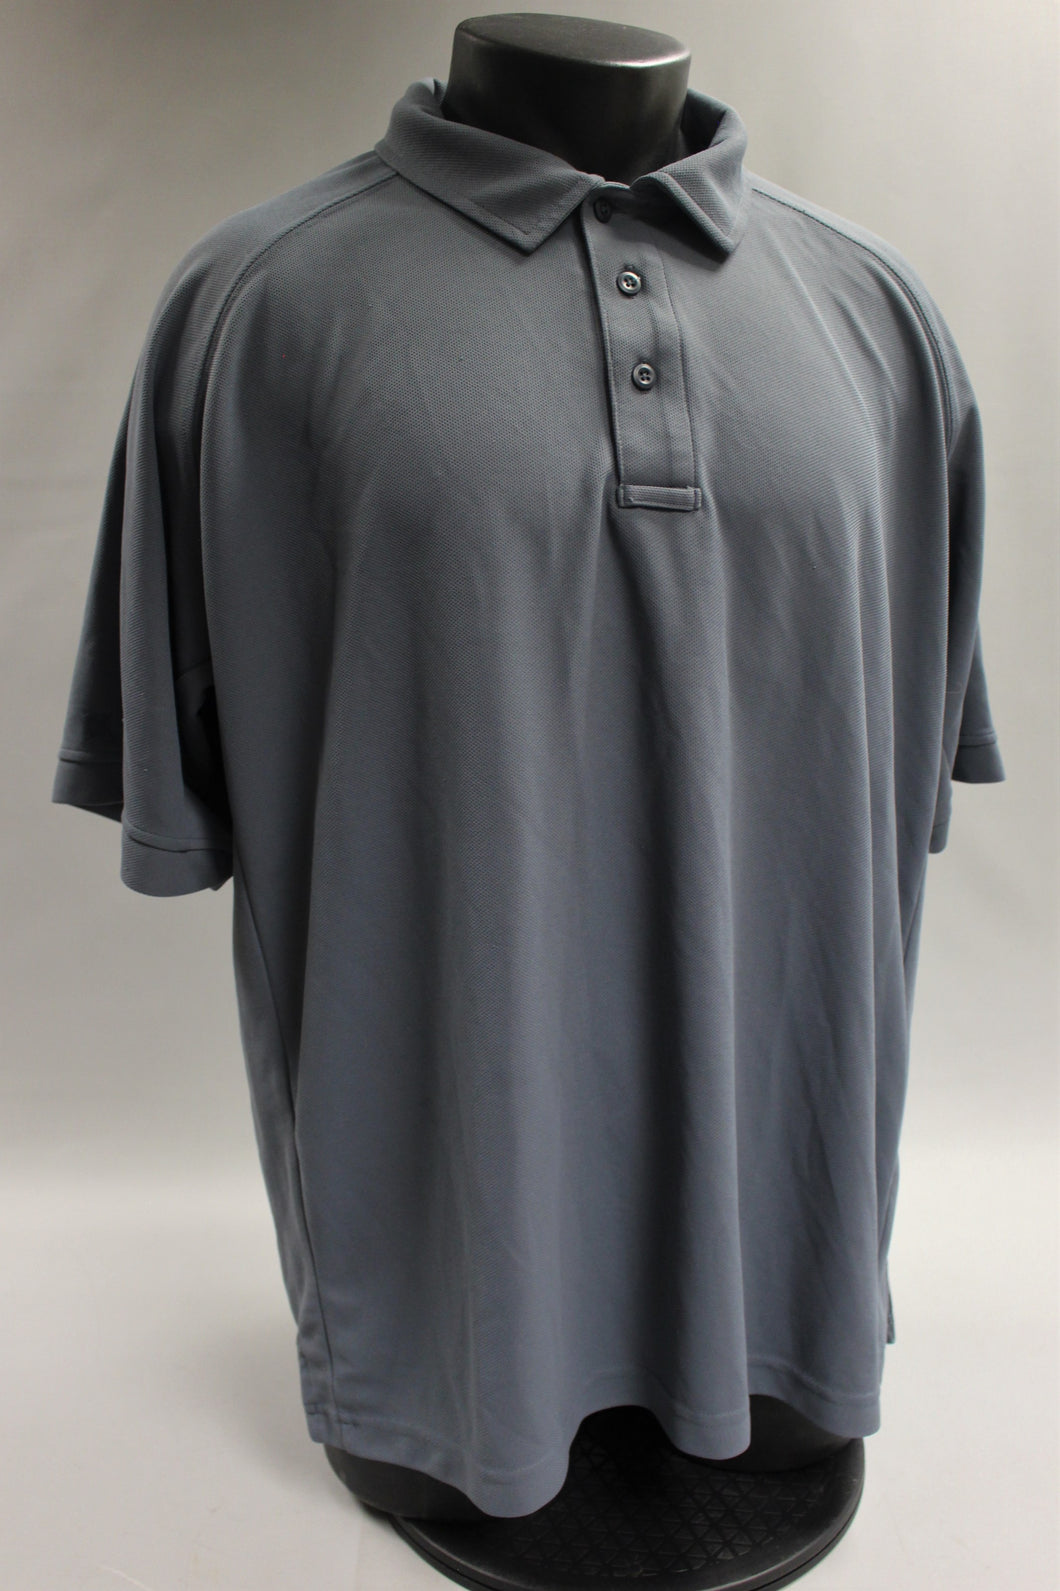 Xvertx Men's Polo Shirt - Size: X Large - Gray - Used